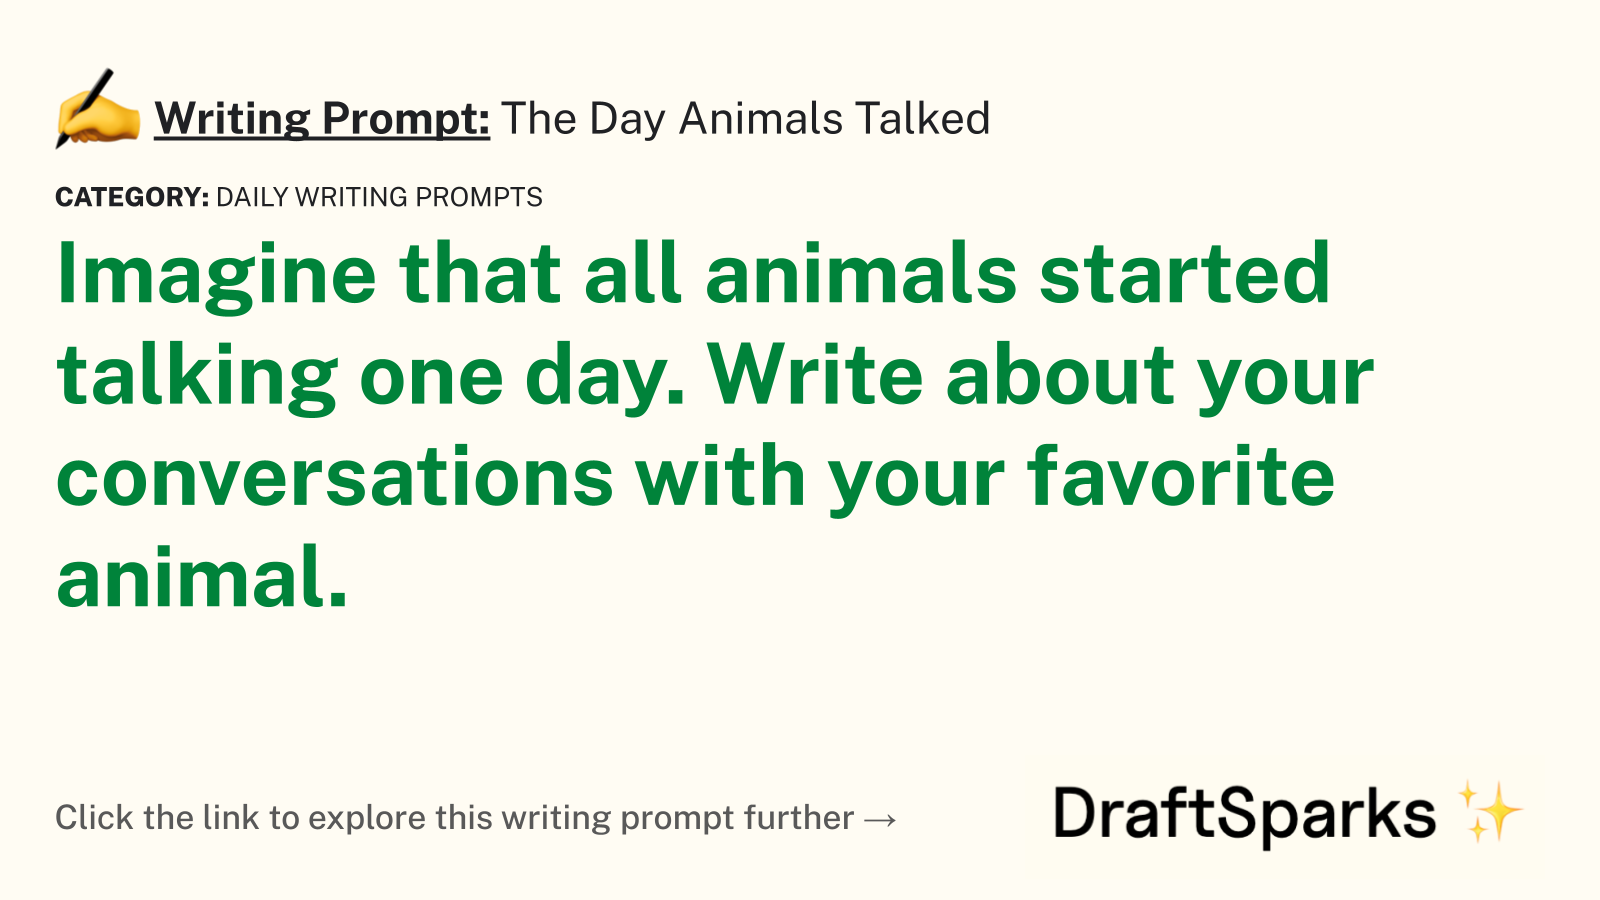 The Day Animals Talked